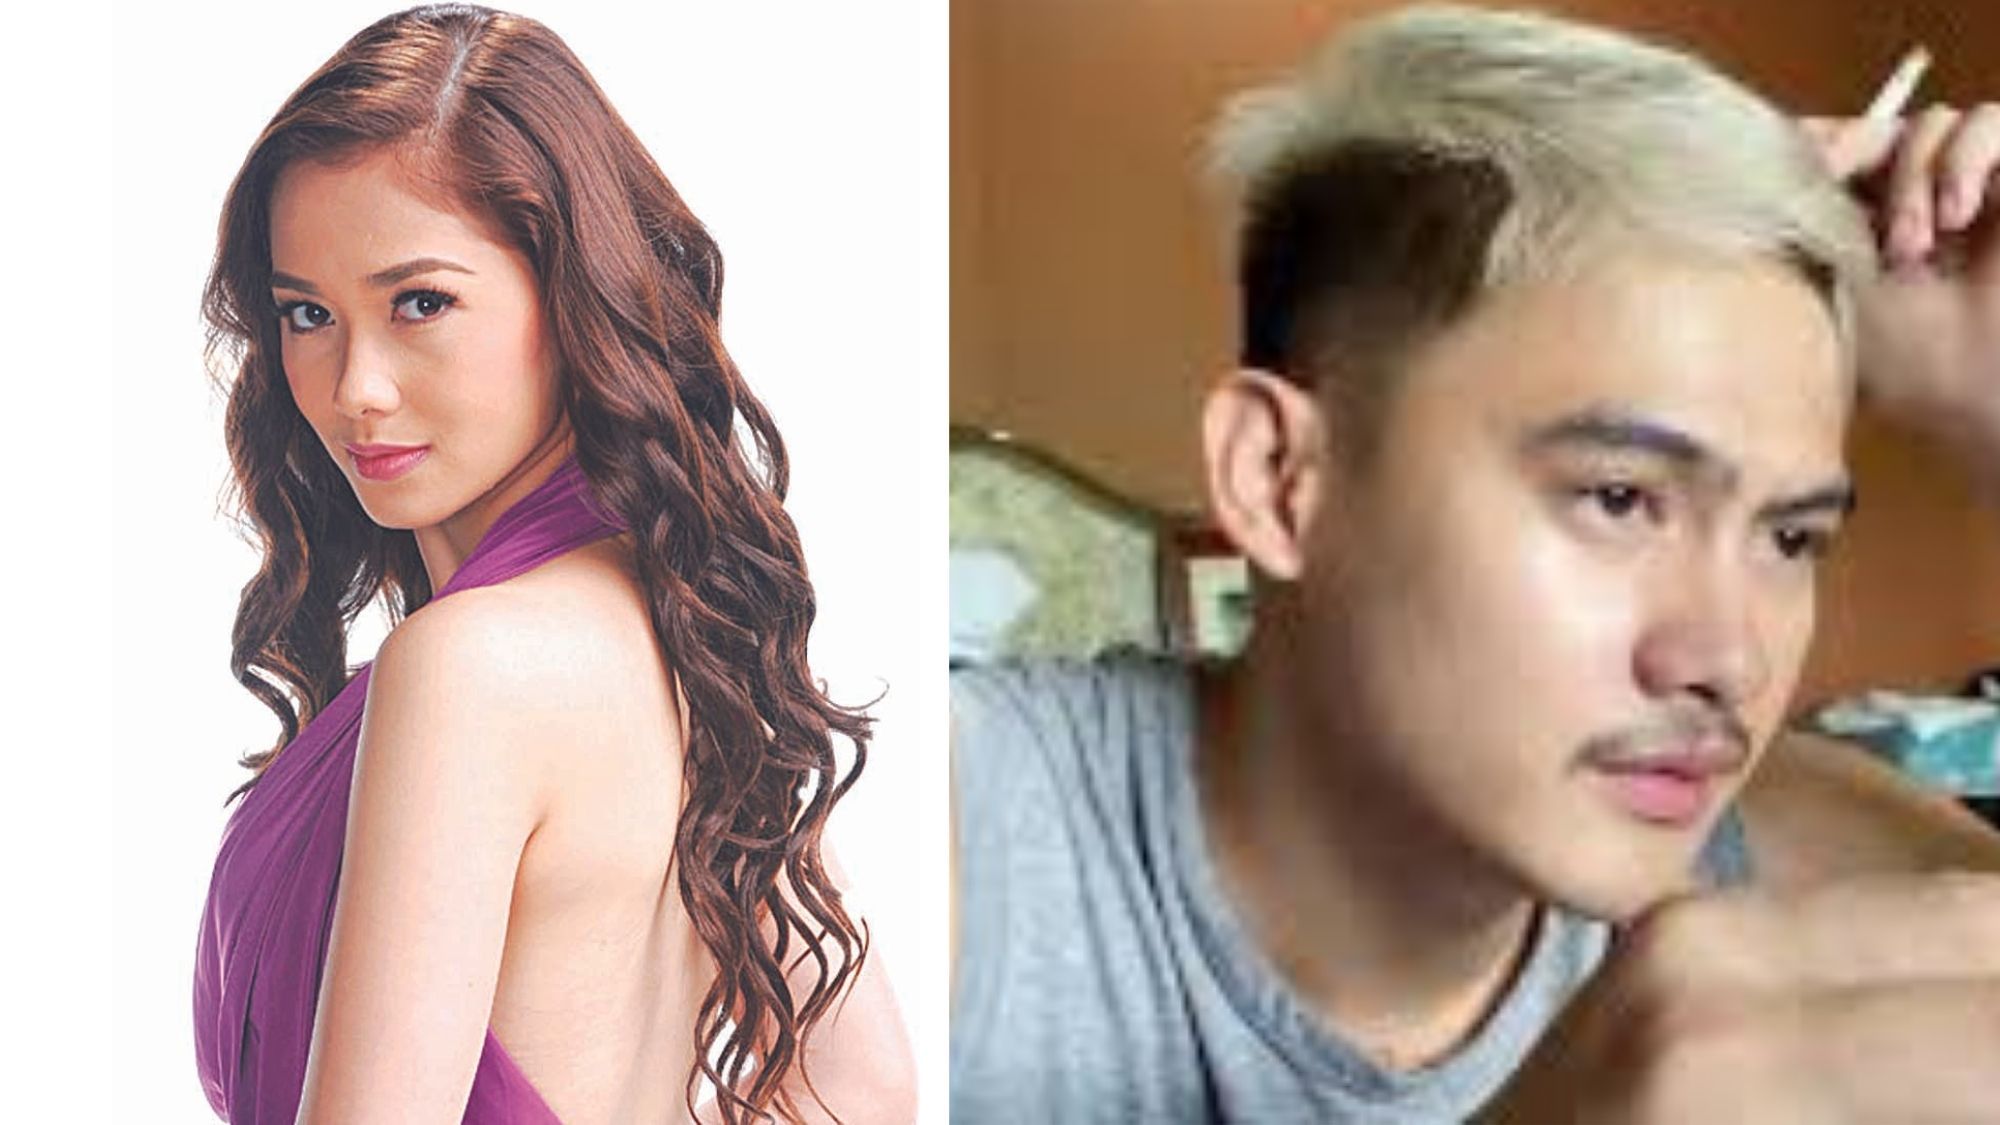 Films of Maja Salvador and Vince Rillon compete with each other in Japan